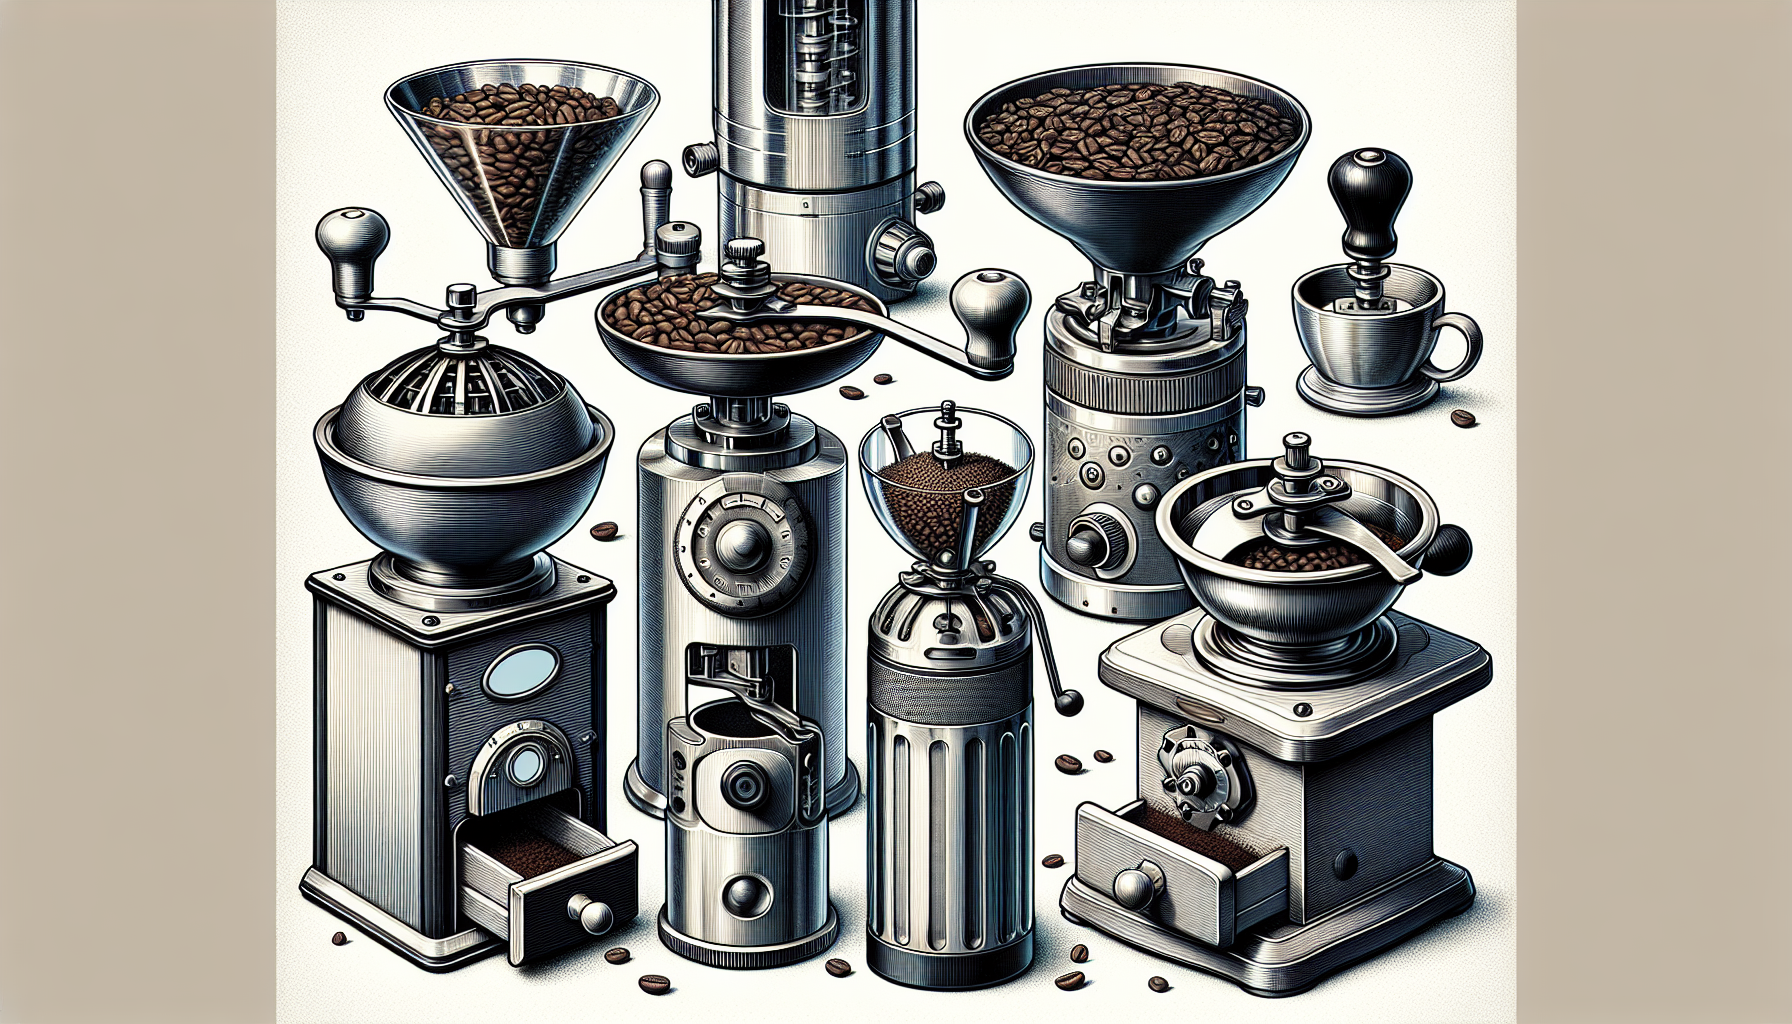 Illustration of a selection of coffee grinders